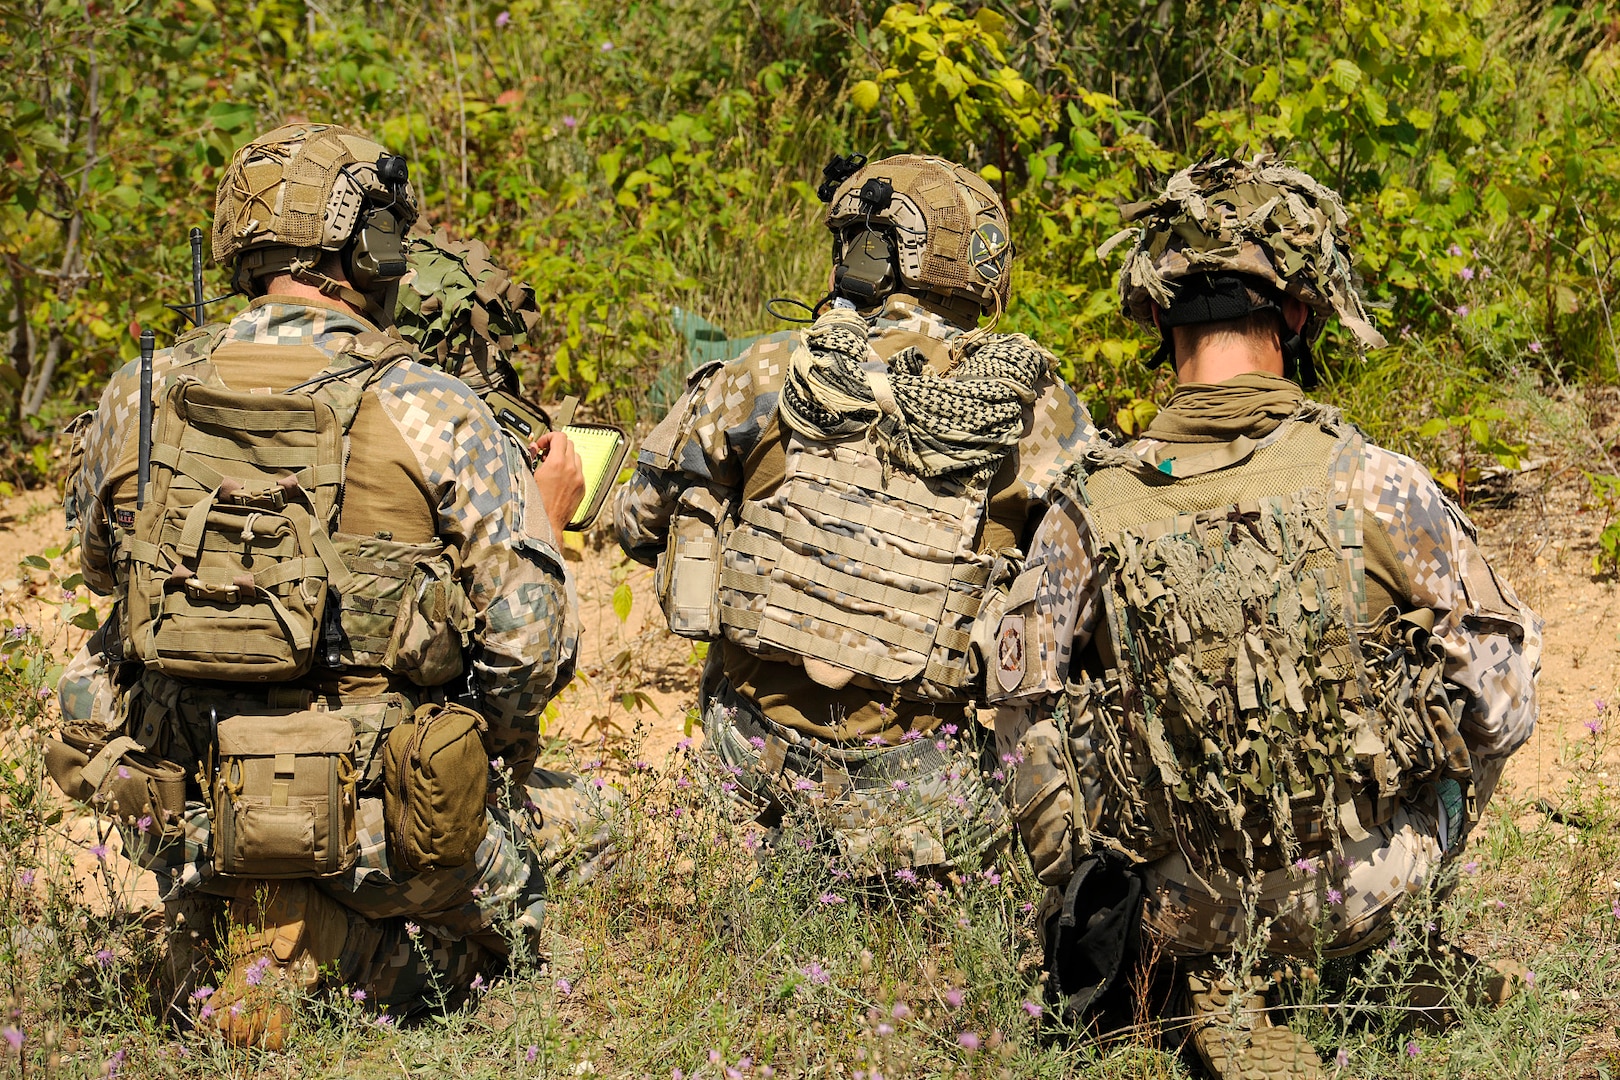 A team of Joint Terminal Attack Controllers (JTACs) from the Latvian National Armed Forces, look over the terrain while conducting close air support training during Northern Strike 20 at Camp Grayling, part of the National All-Domain Warfighting Center in Northern Michigan during Northern Strike 20, July 28, 2020.